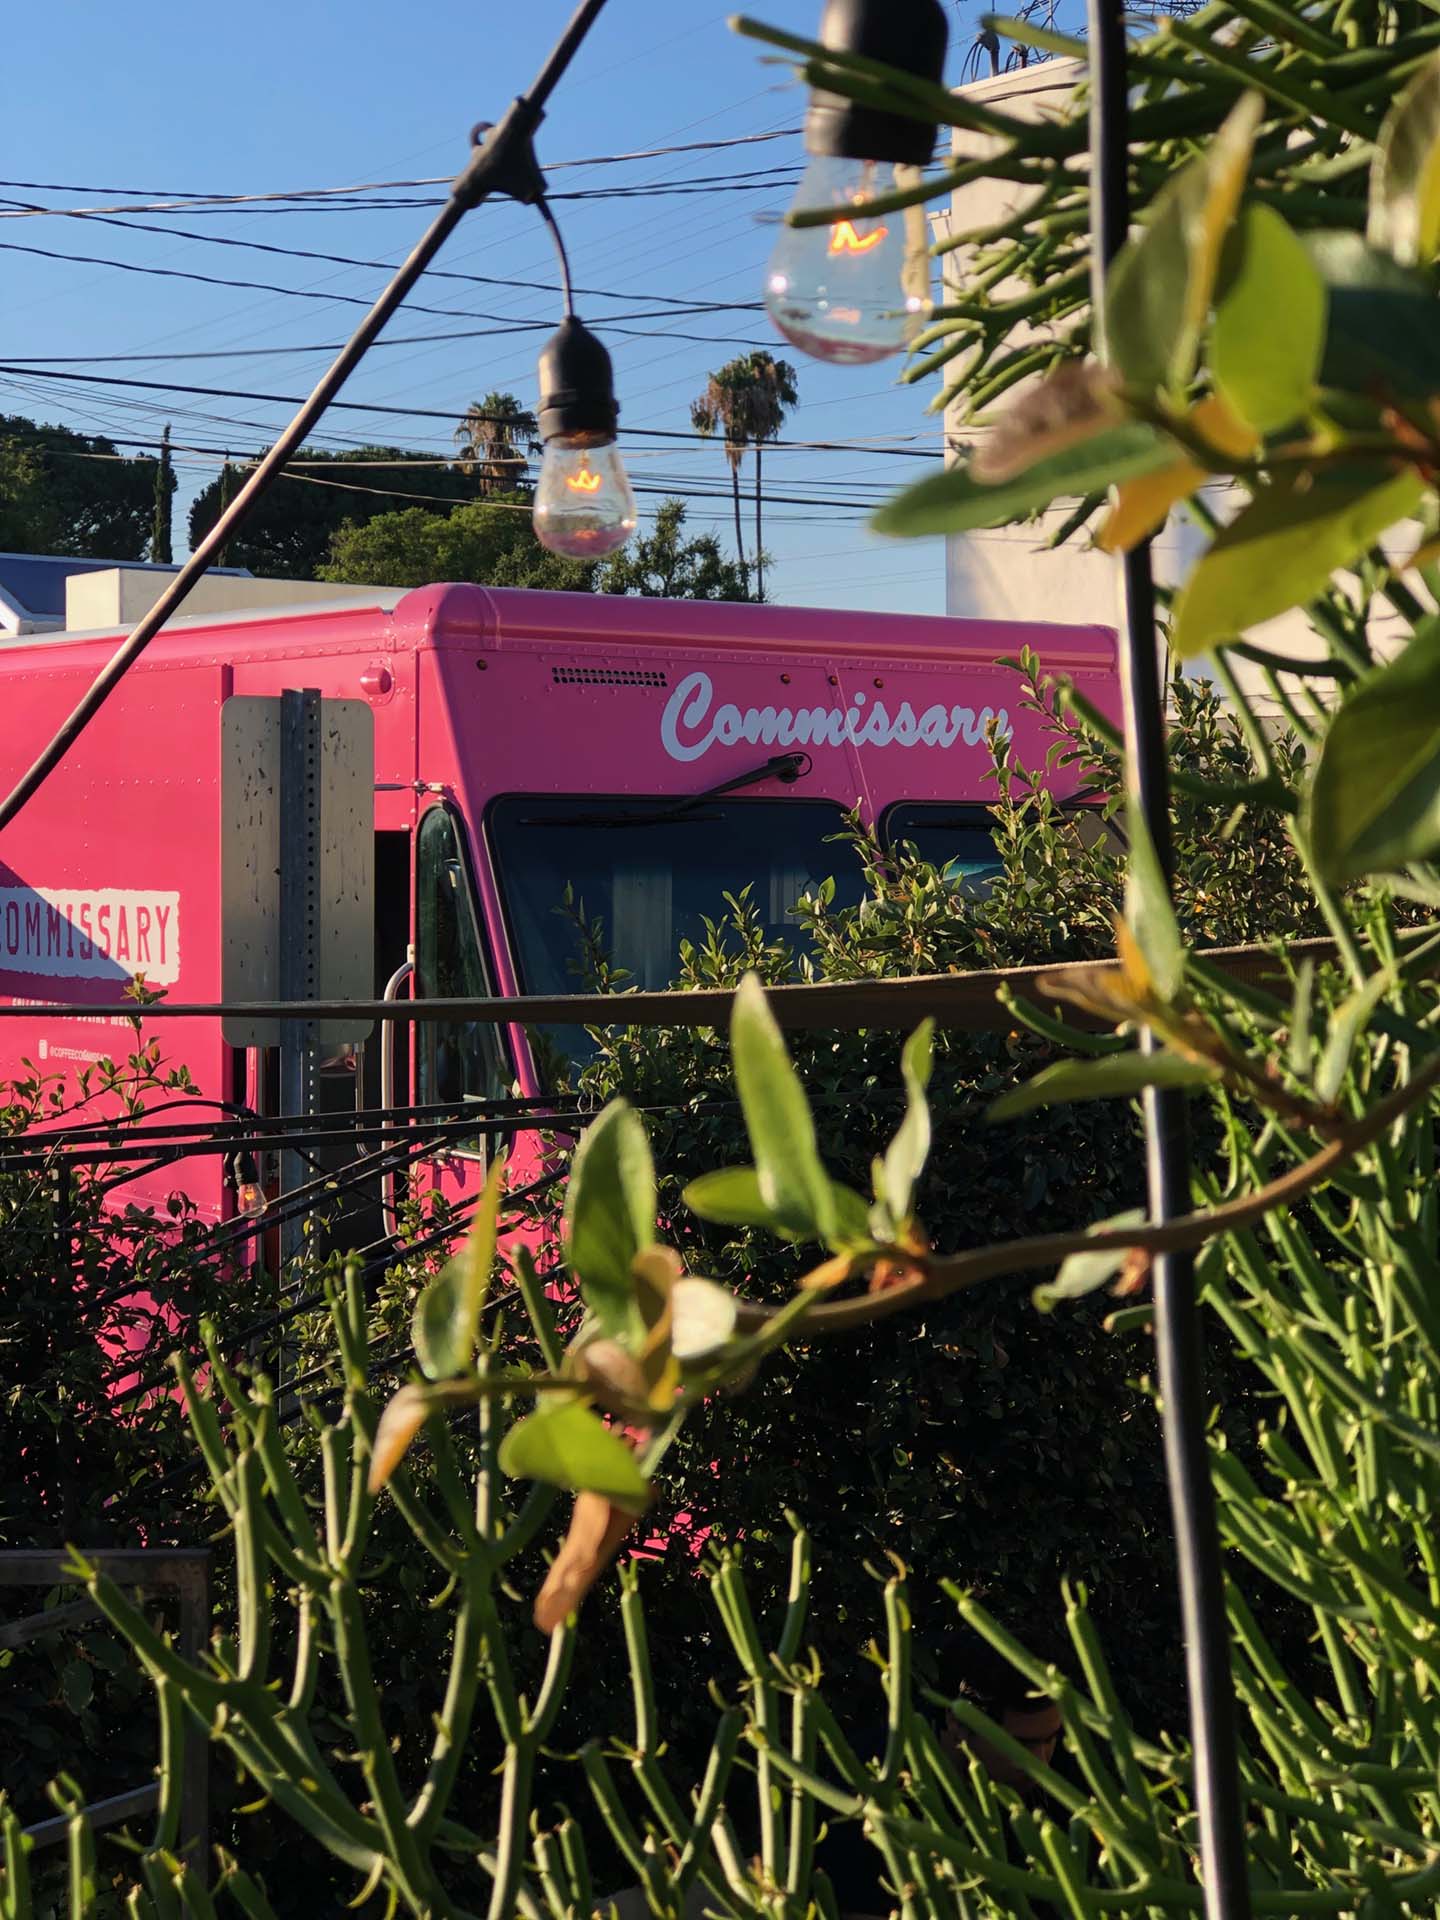 Coffee Commissary food truck